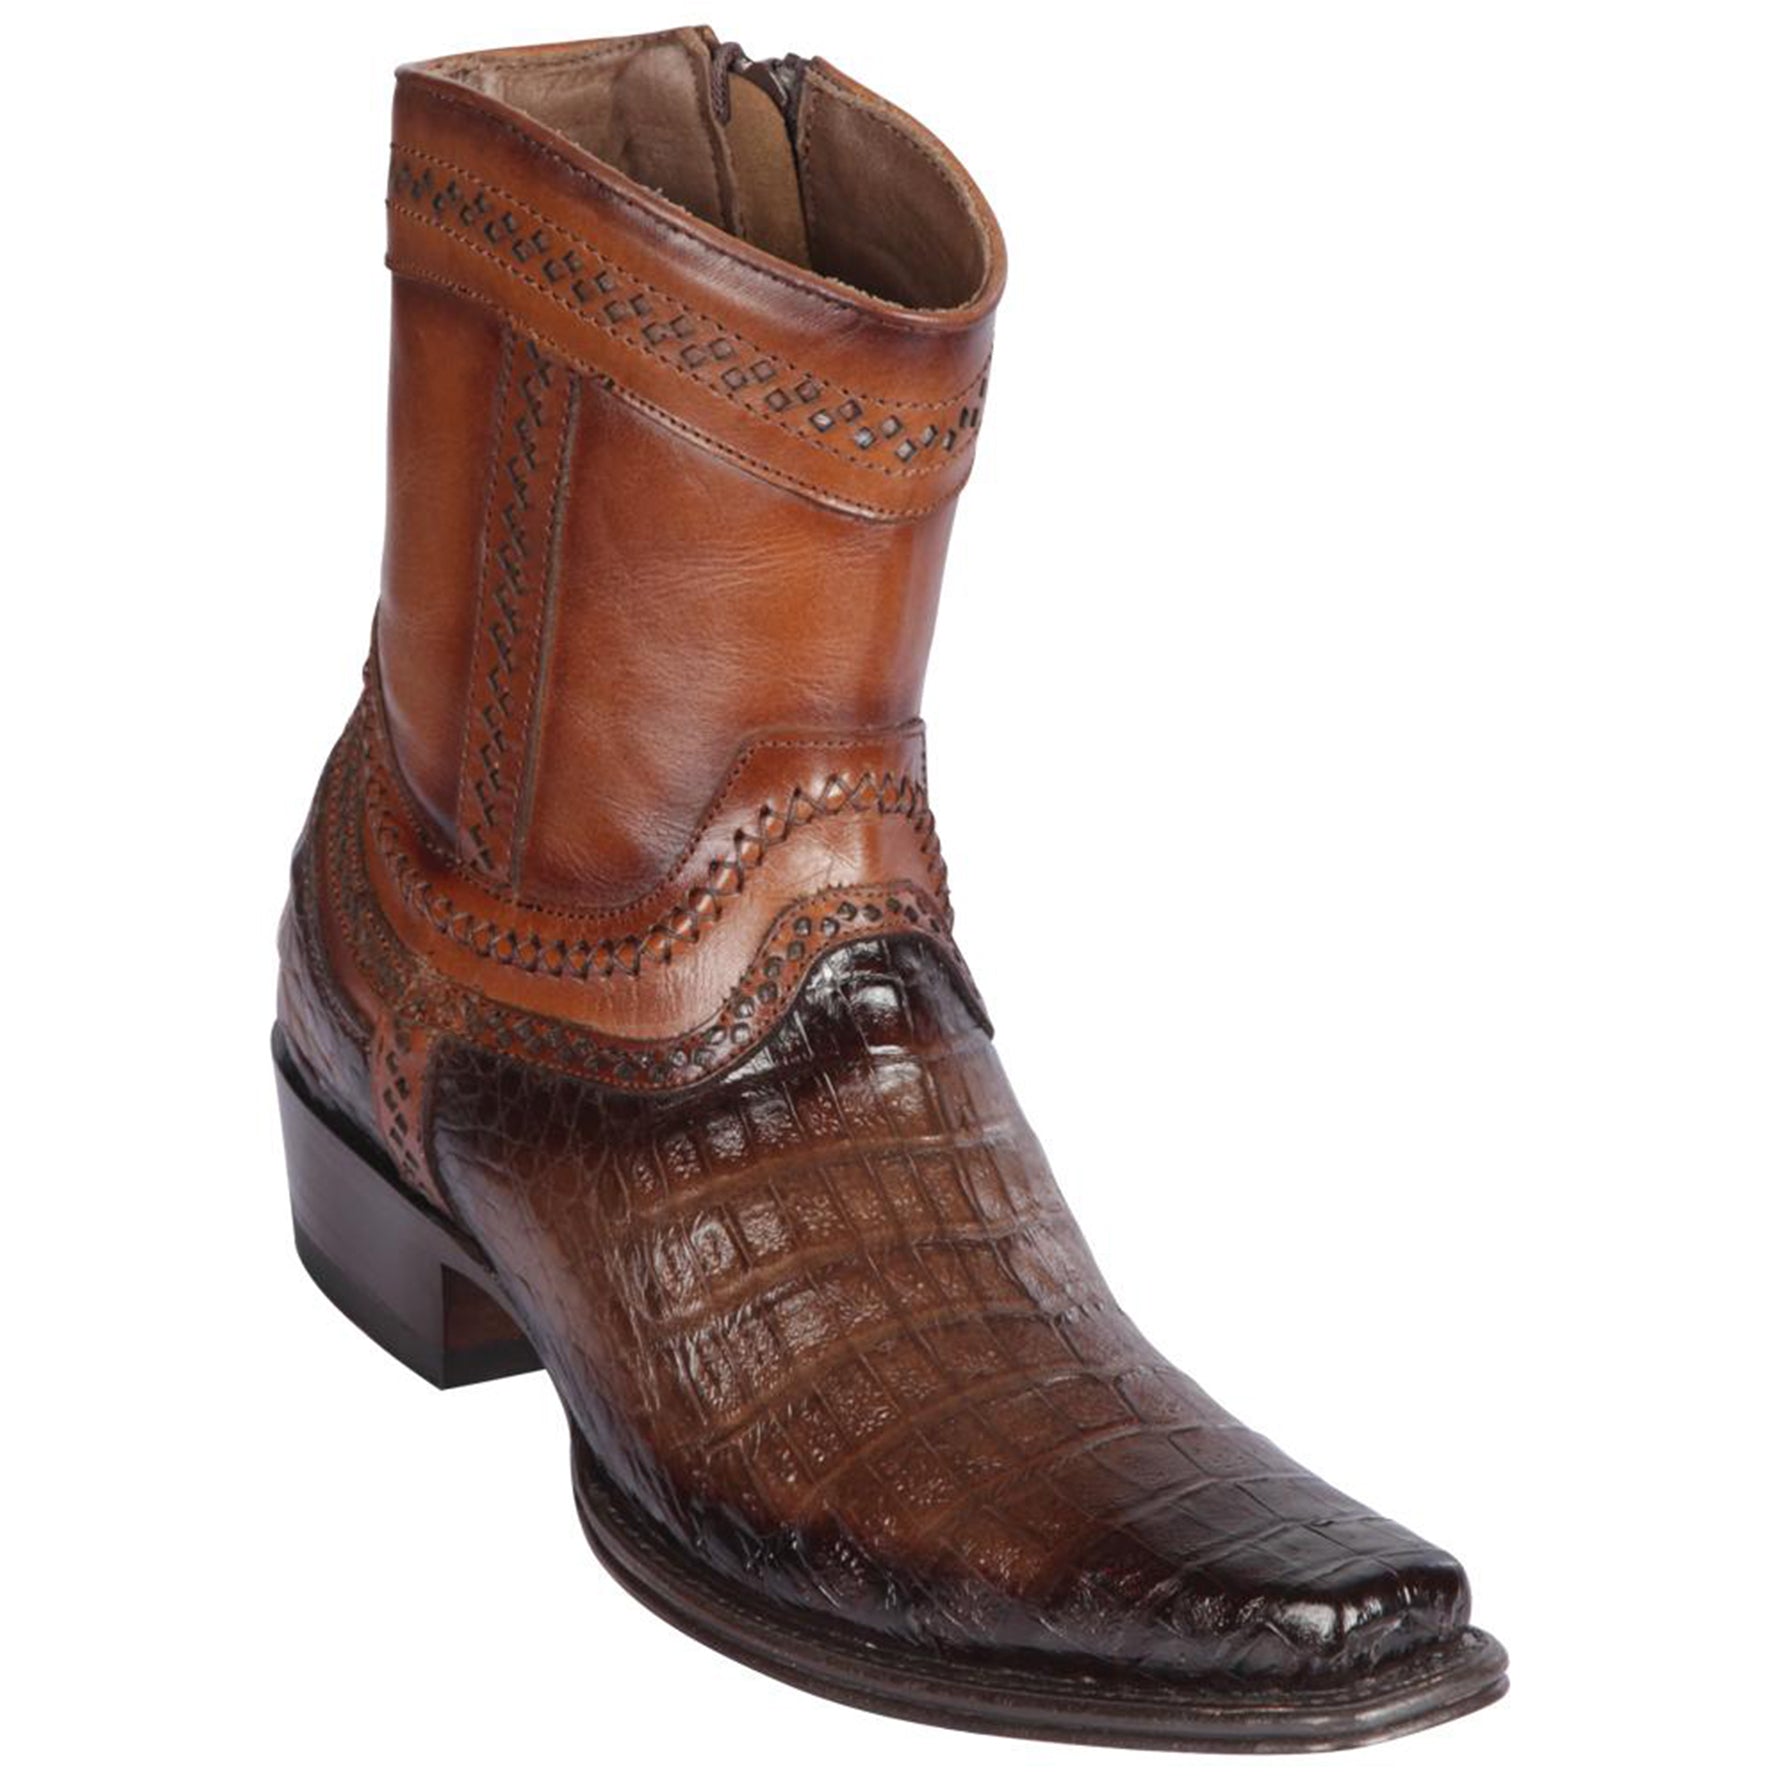 Caiman Belly Mens European Square Toe Boots